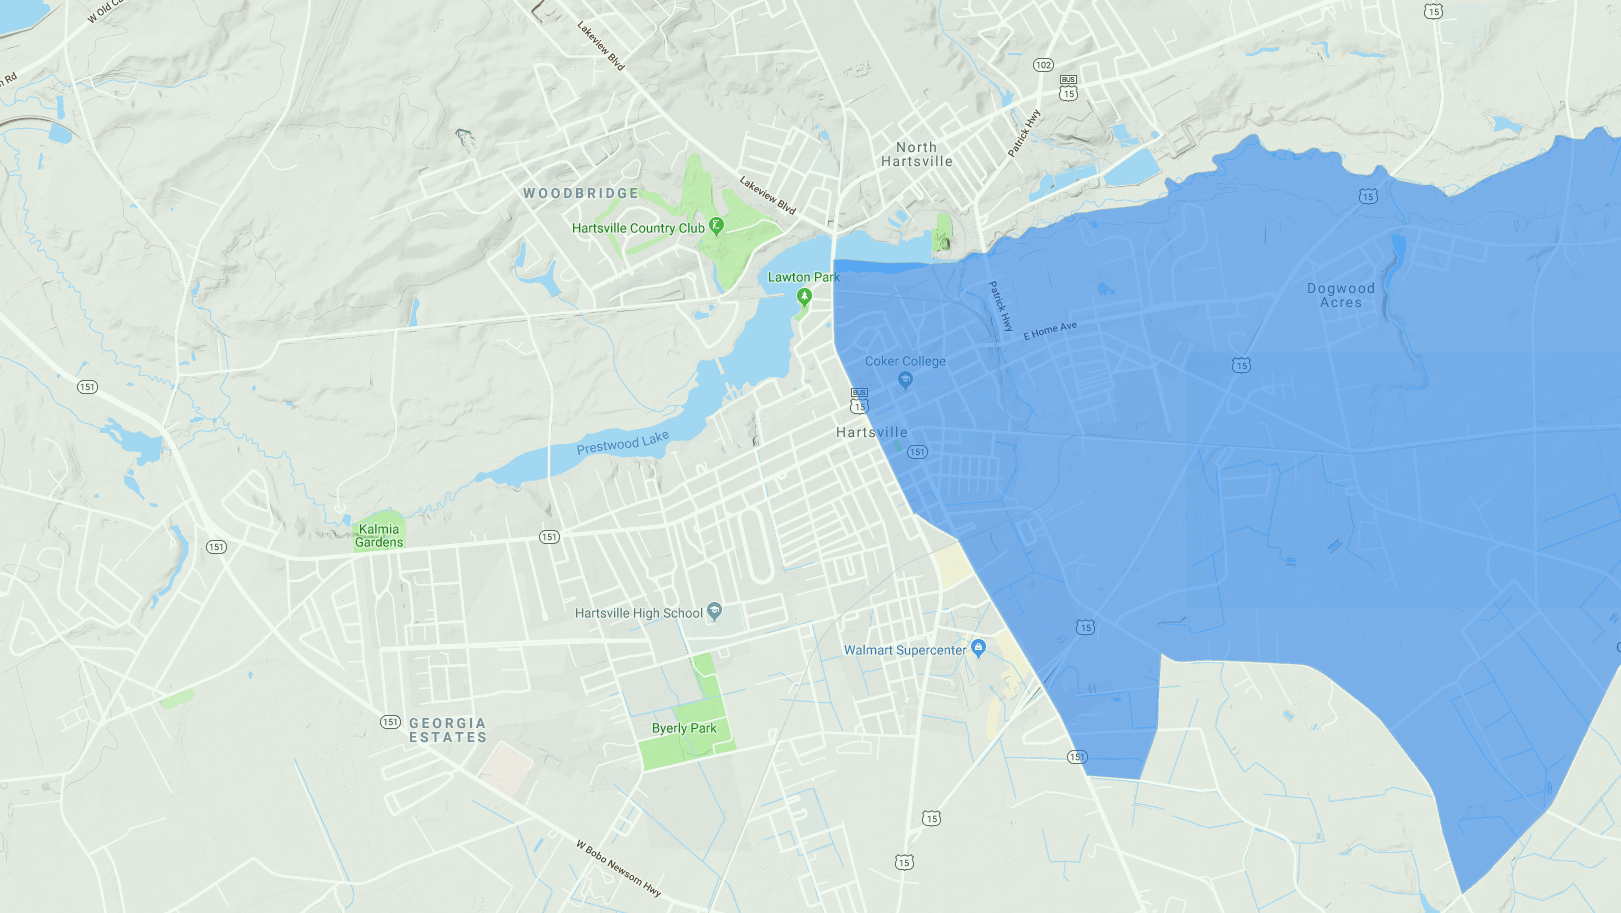 A screenshot of the Hartsville, SC area of the SC Opportunity Zone Map.